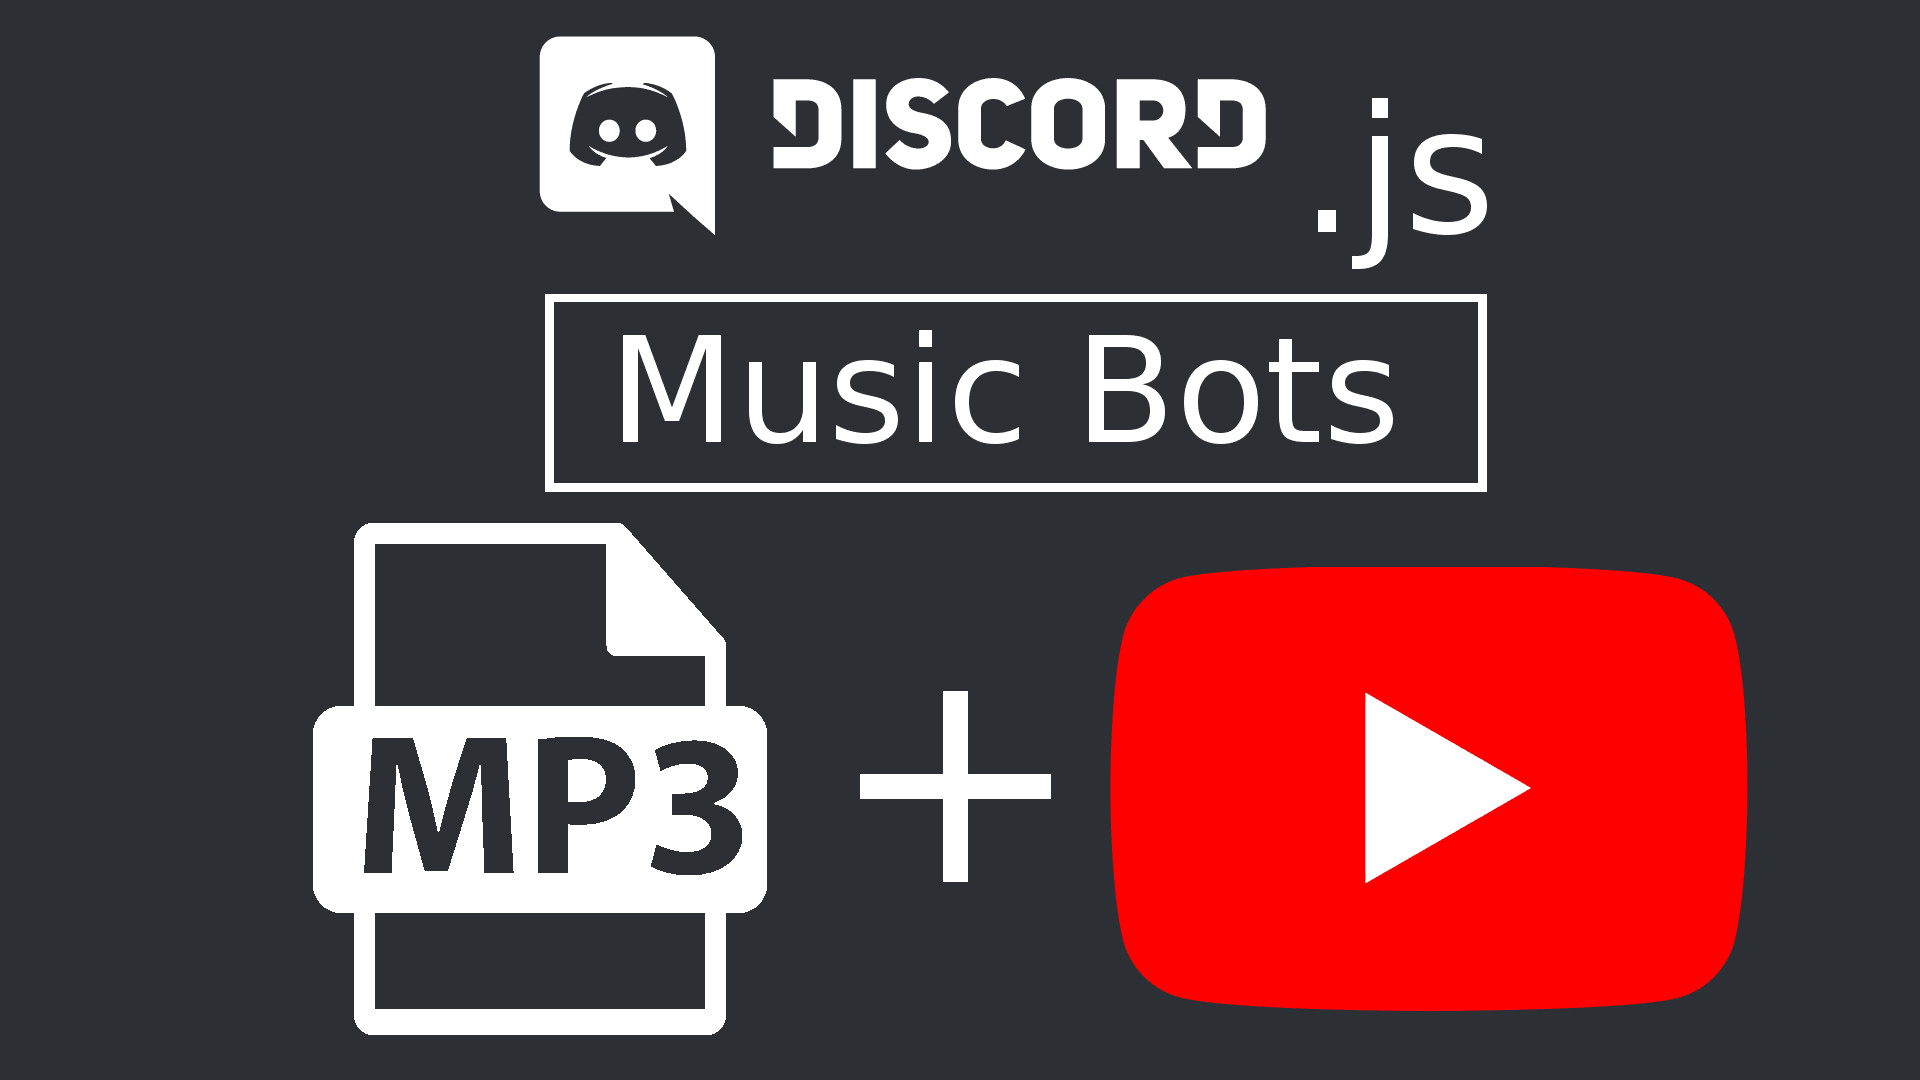 Make Your Custom Discord Music Or Sound Effect Bot By Paulus9